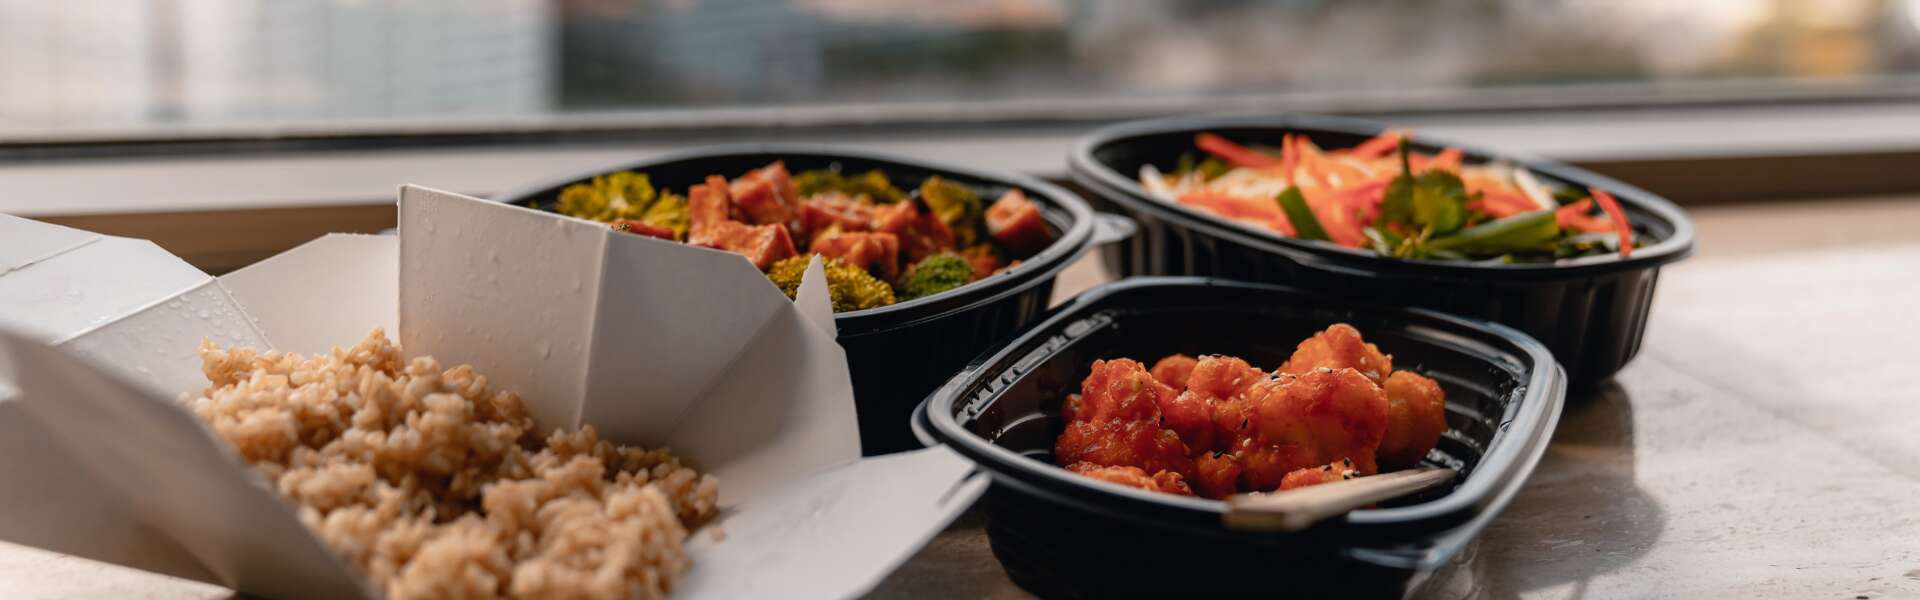 Close-up of takeout food in plastic containers On Table